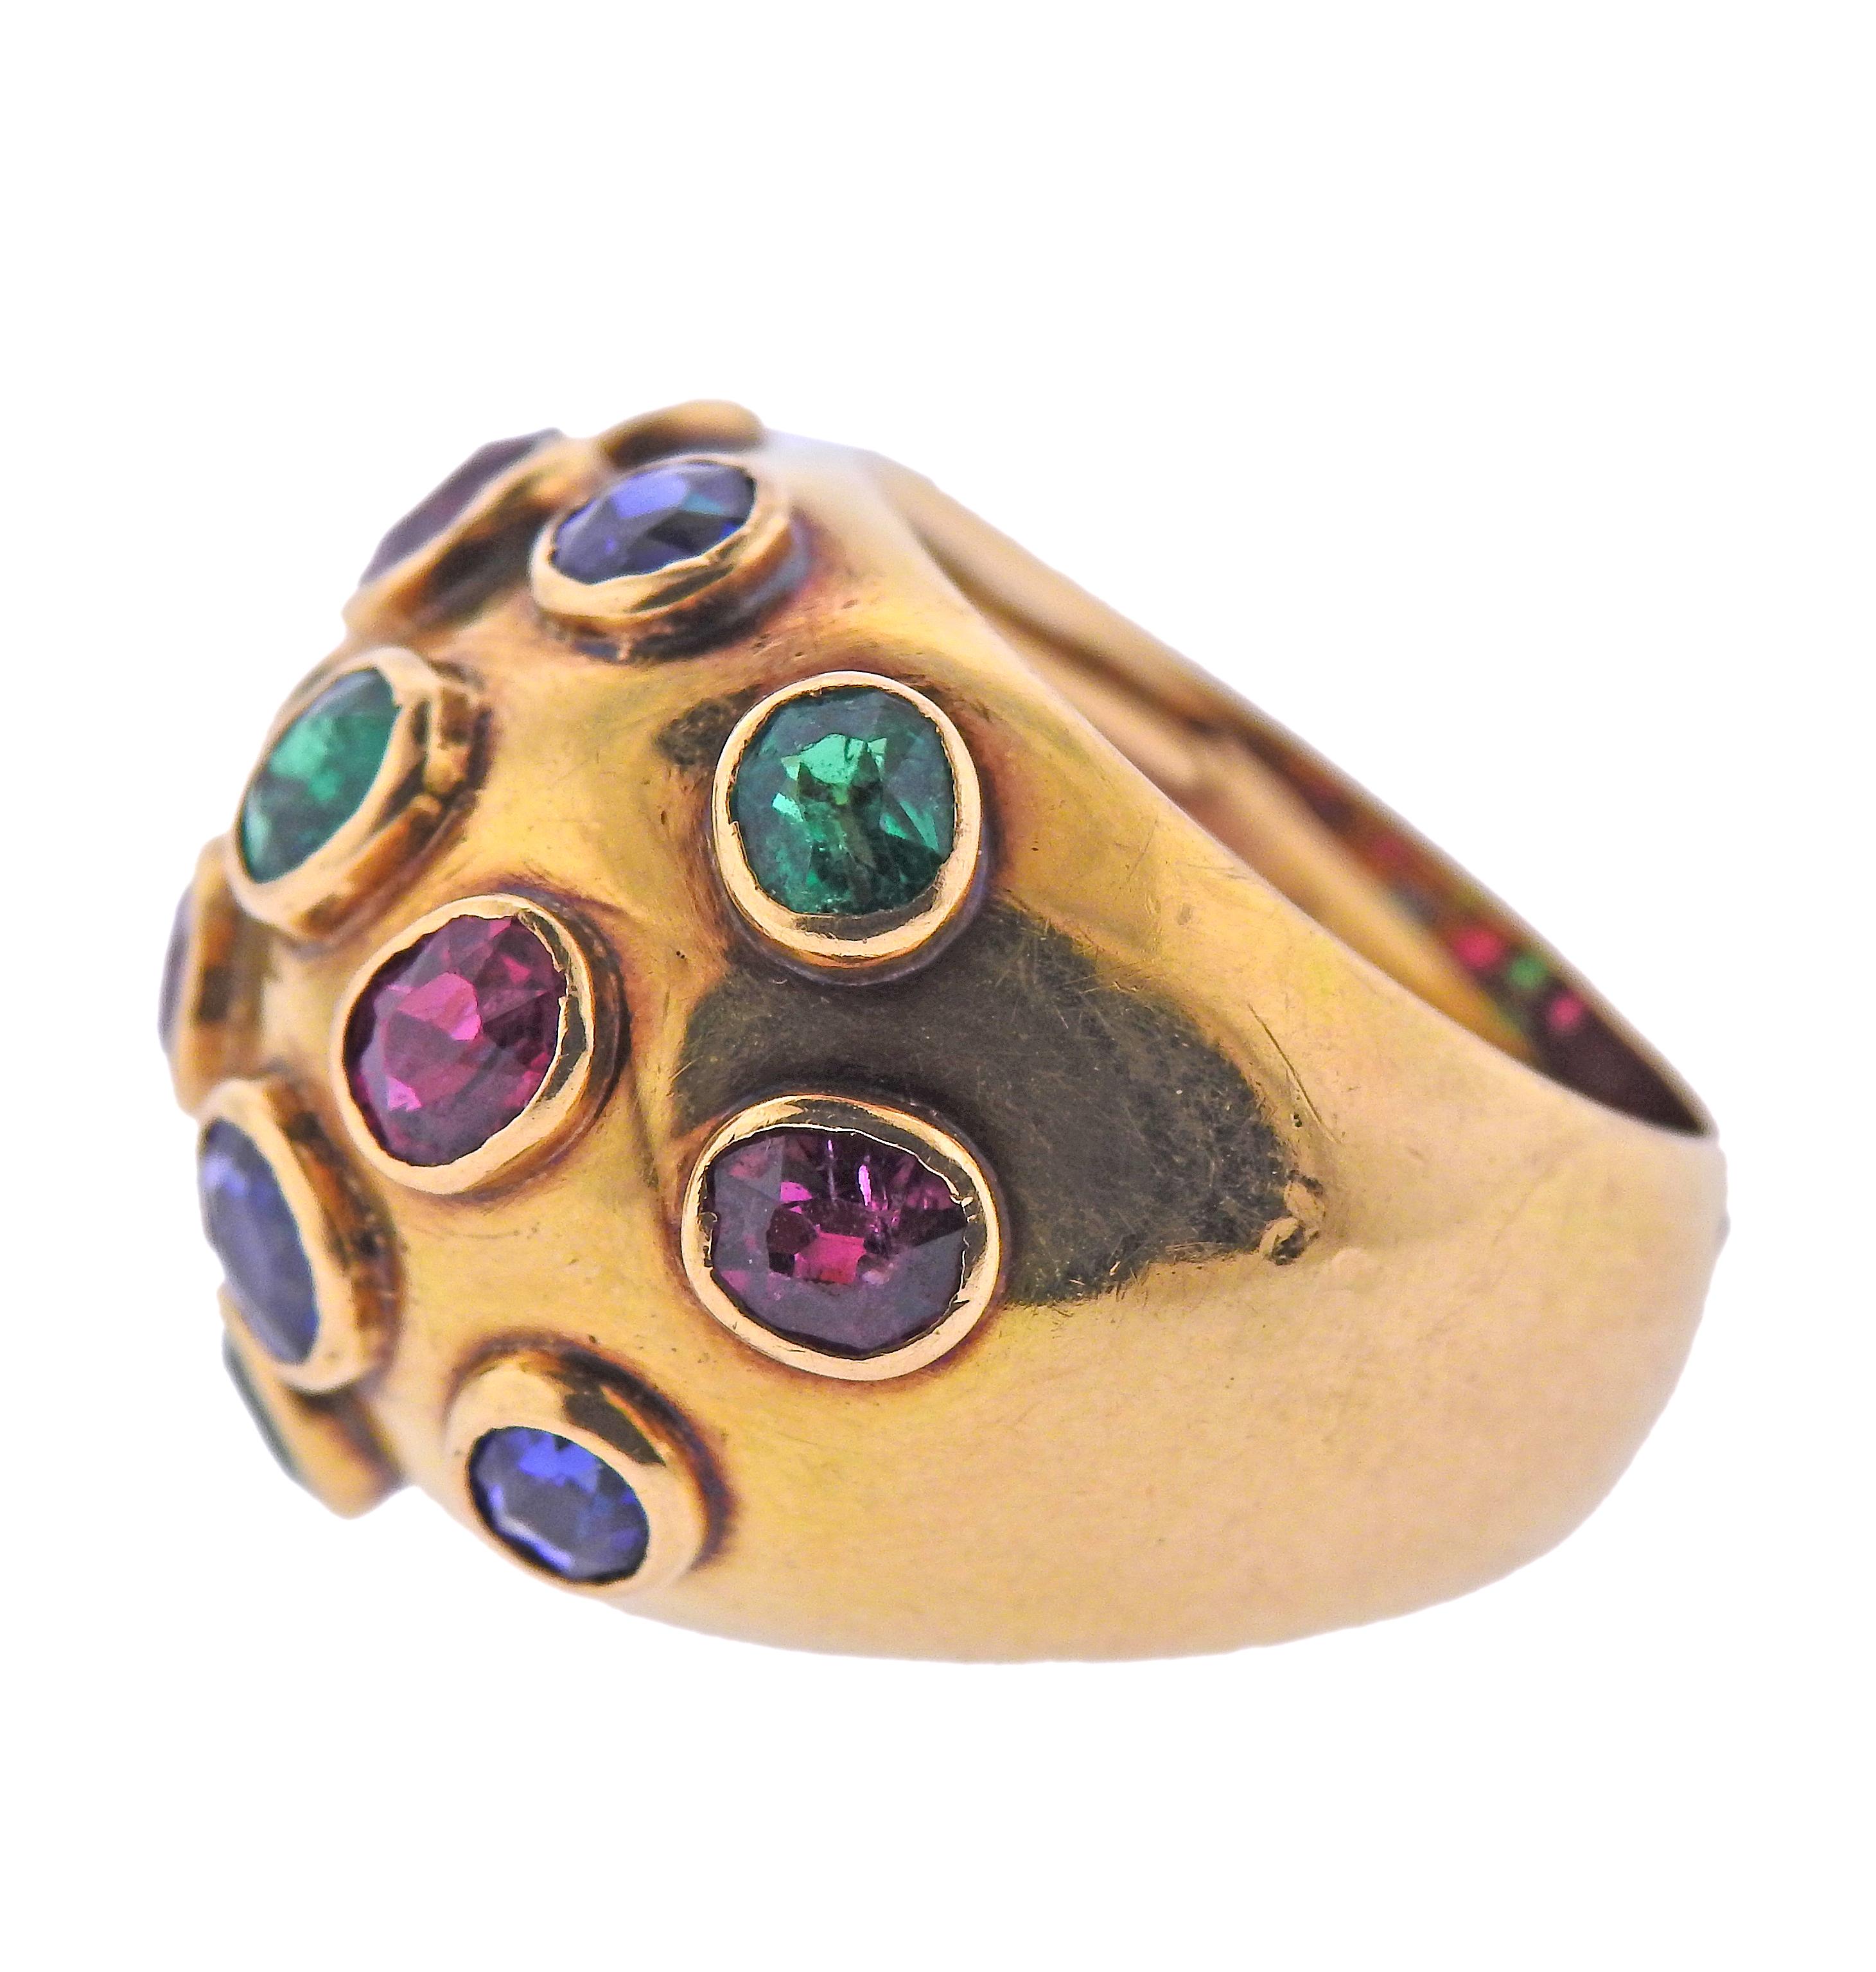 French made, possibly by Belperron, circa 1930s, 18k gold dome ring, set with rubies, sapphires and emeralds. Ring size - 6, ring top is 18mm wide. Marked with French gold marks. Weight - 11.7 grams. 